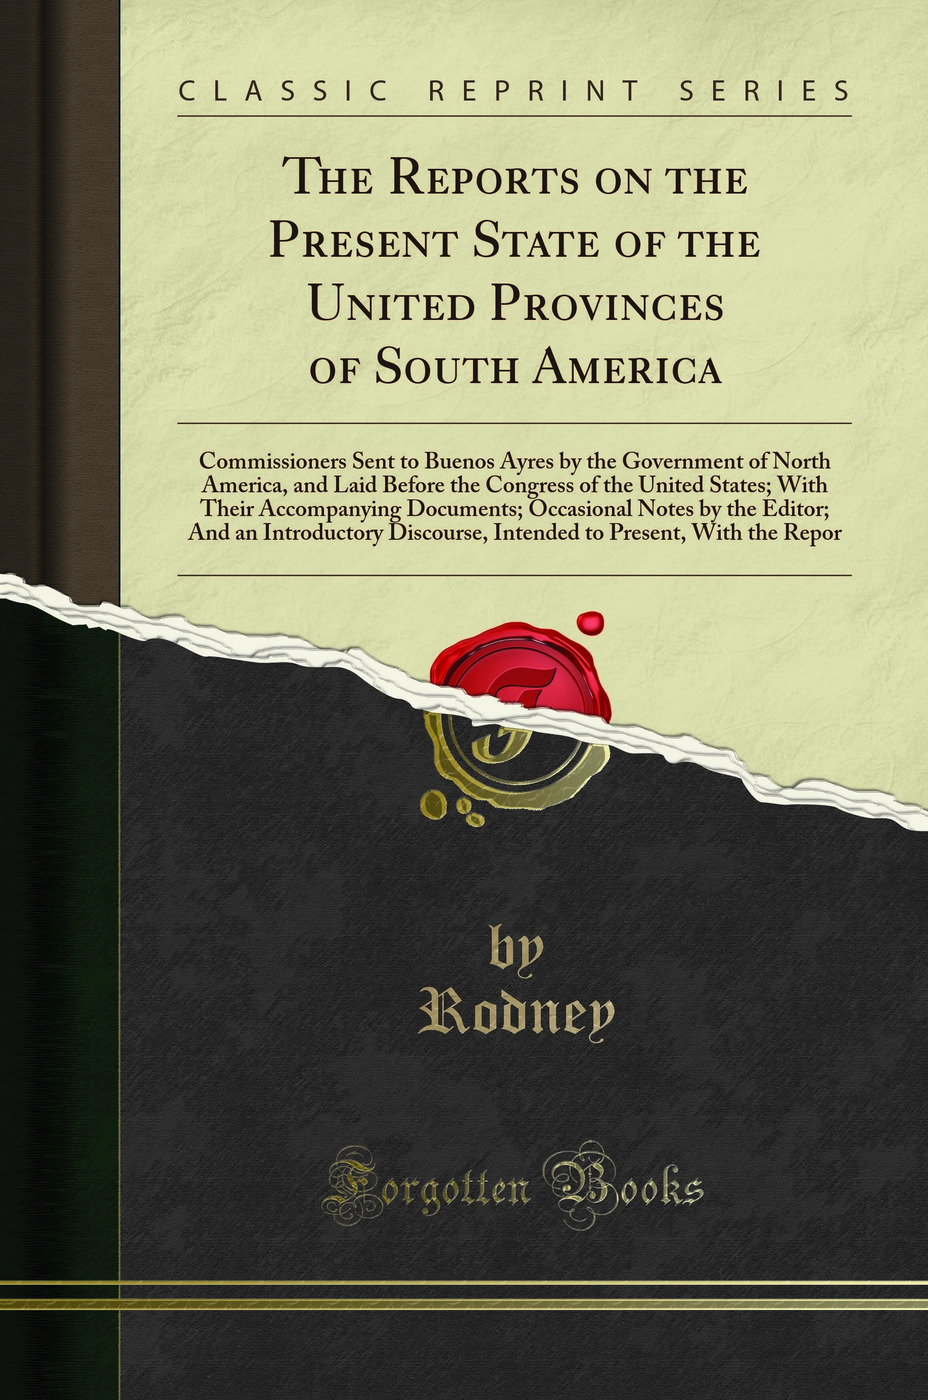 The Reports on the Present State of the United Provinces of South America - Rodney, Graham